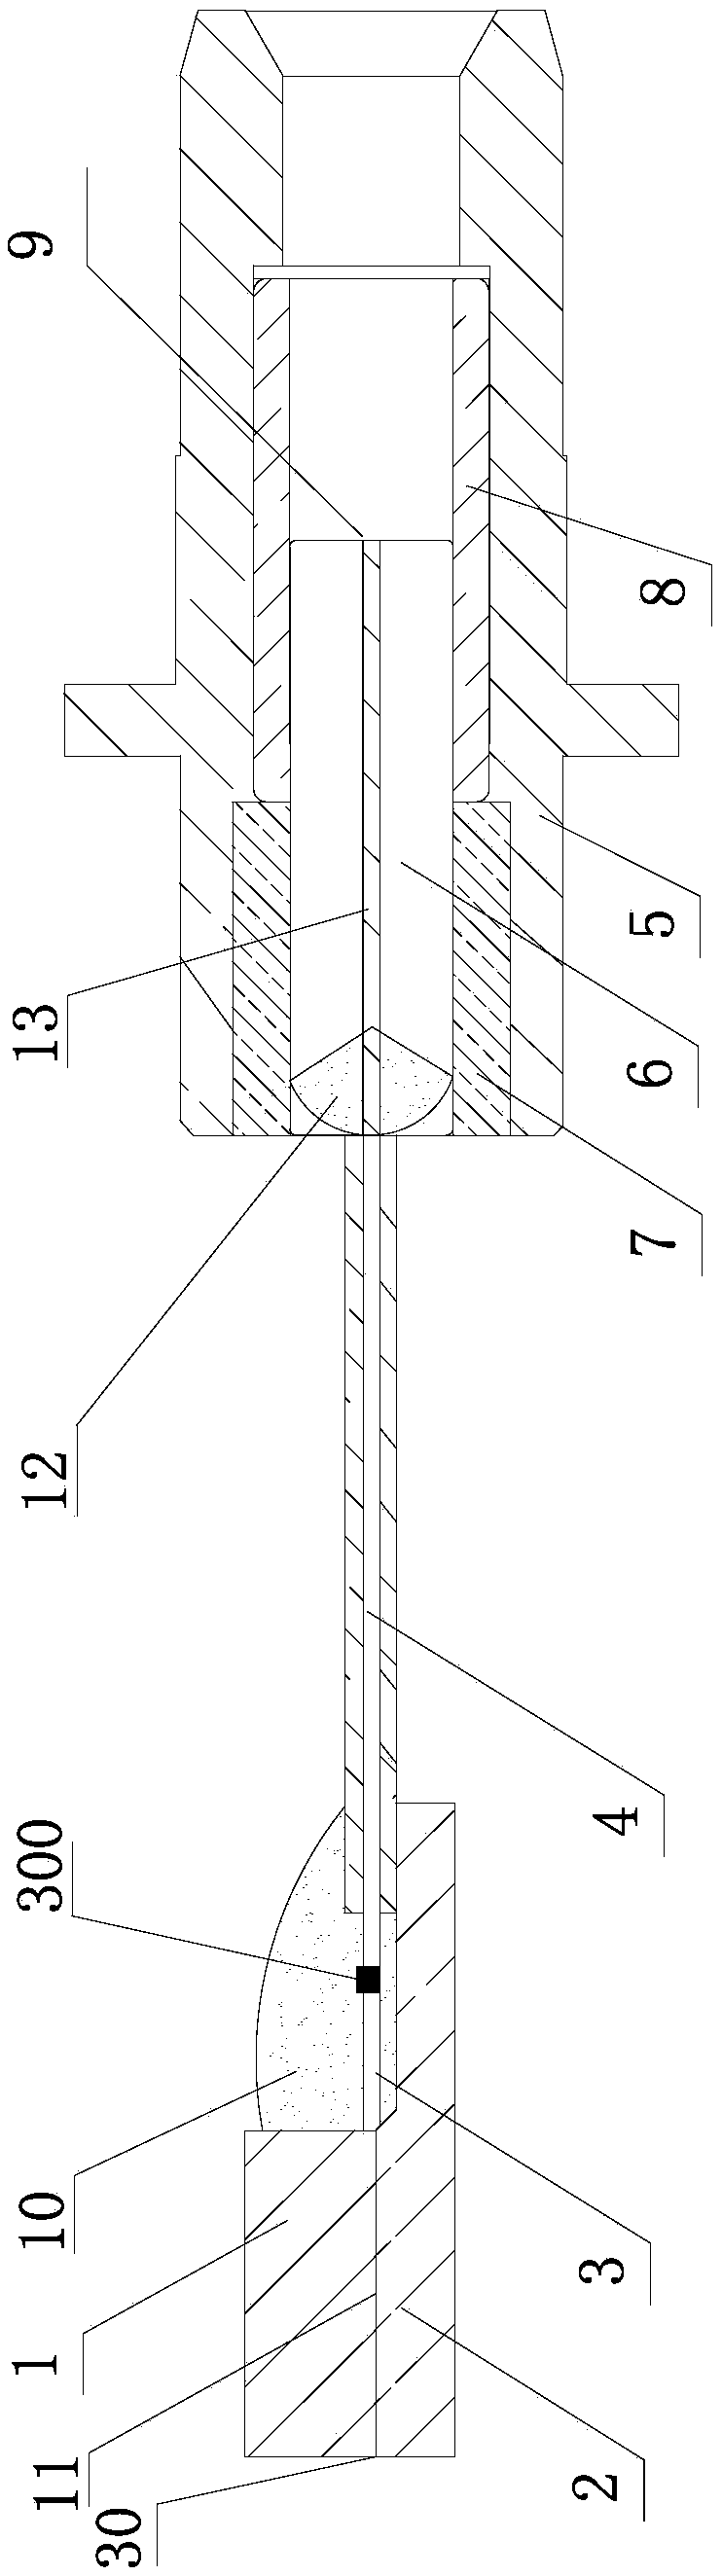 Optical fiber assembly applied to silicon photonic optical communication